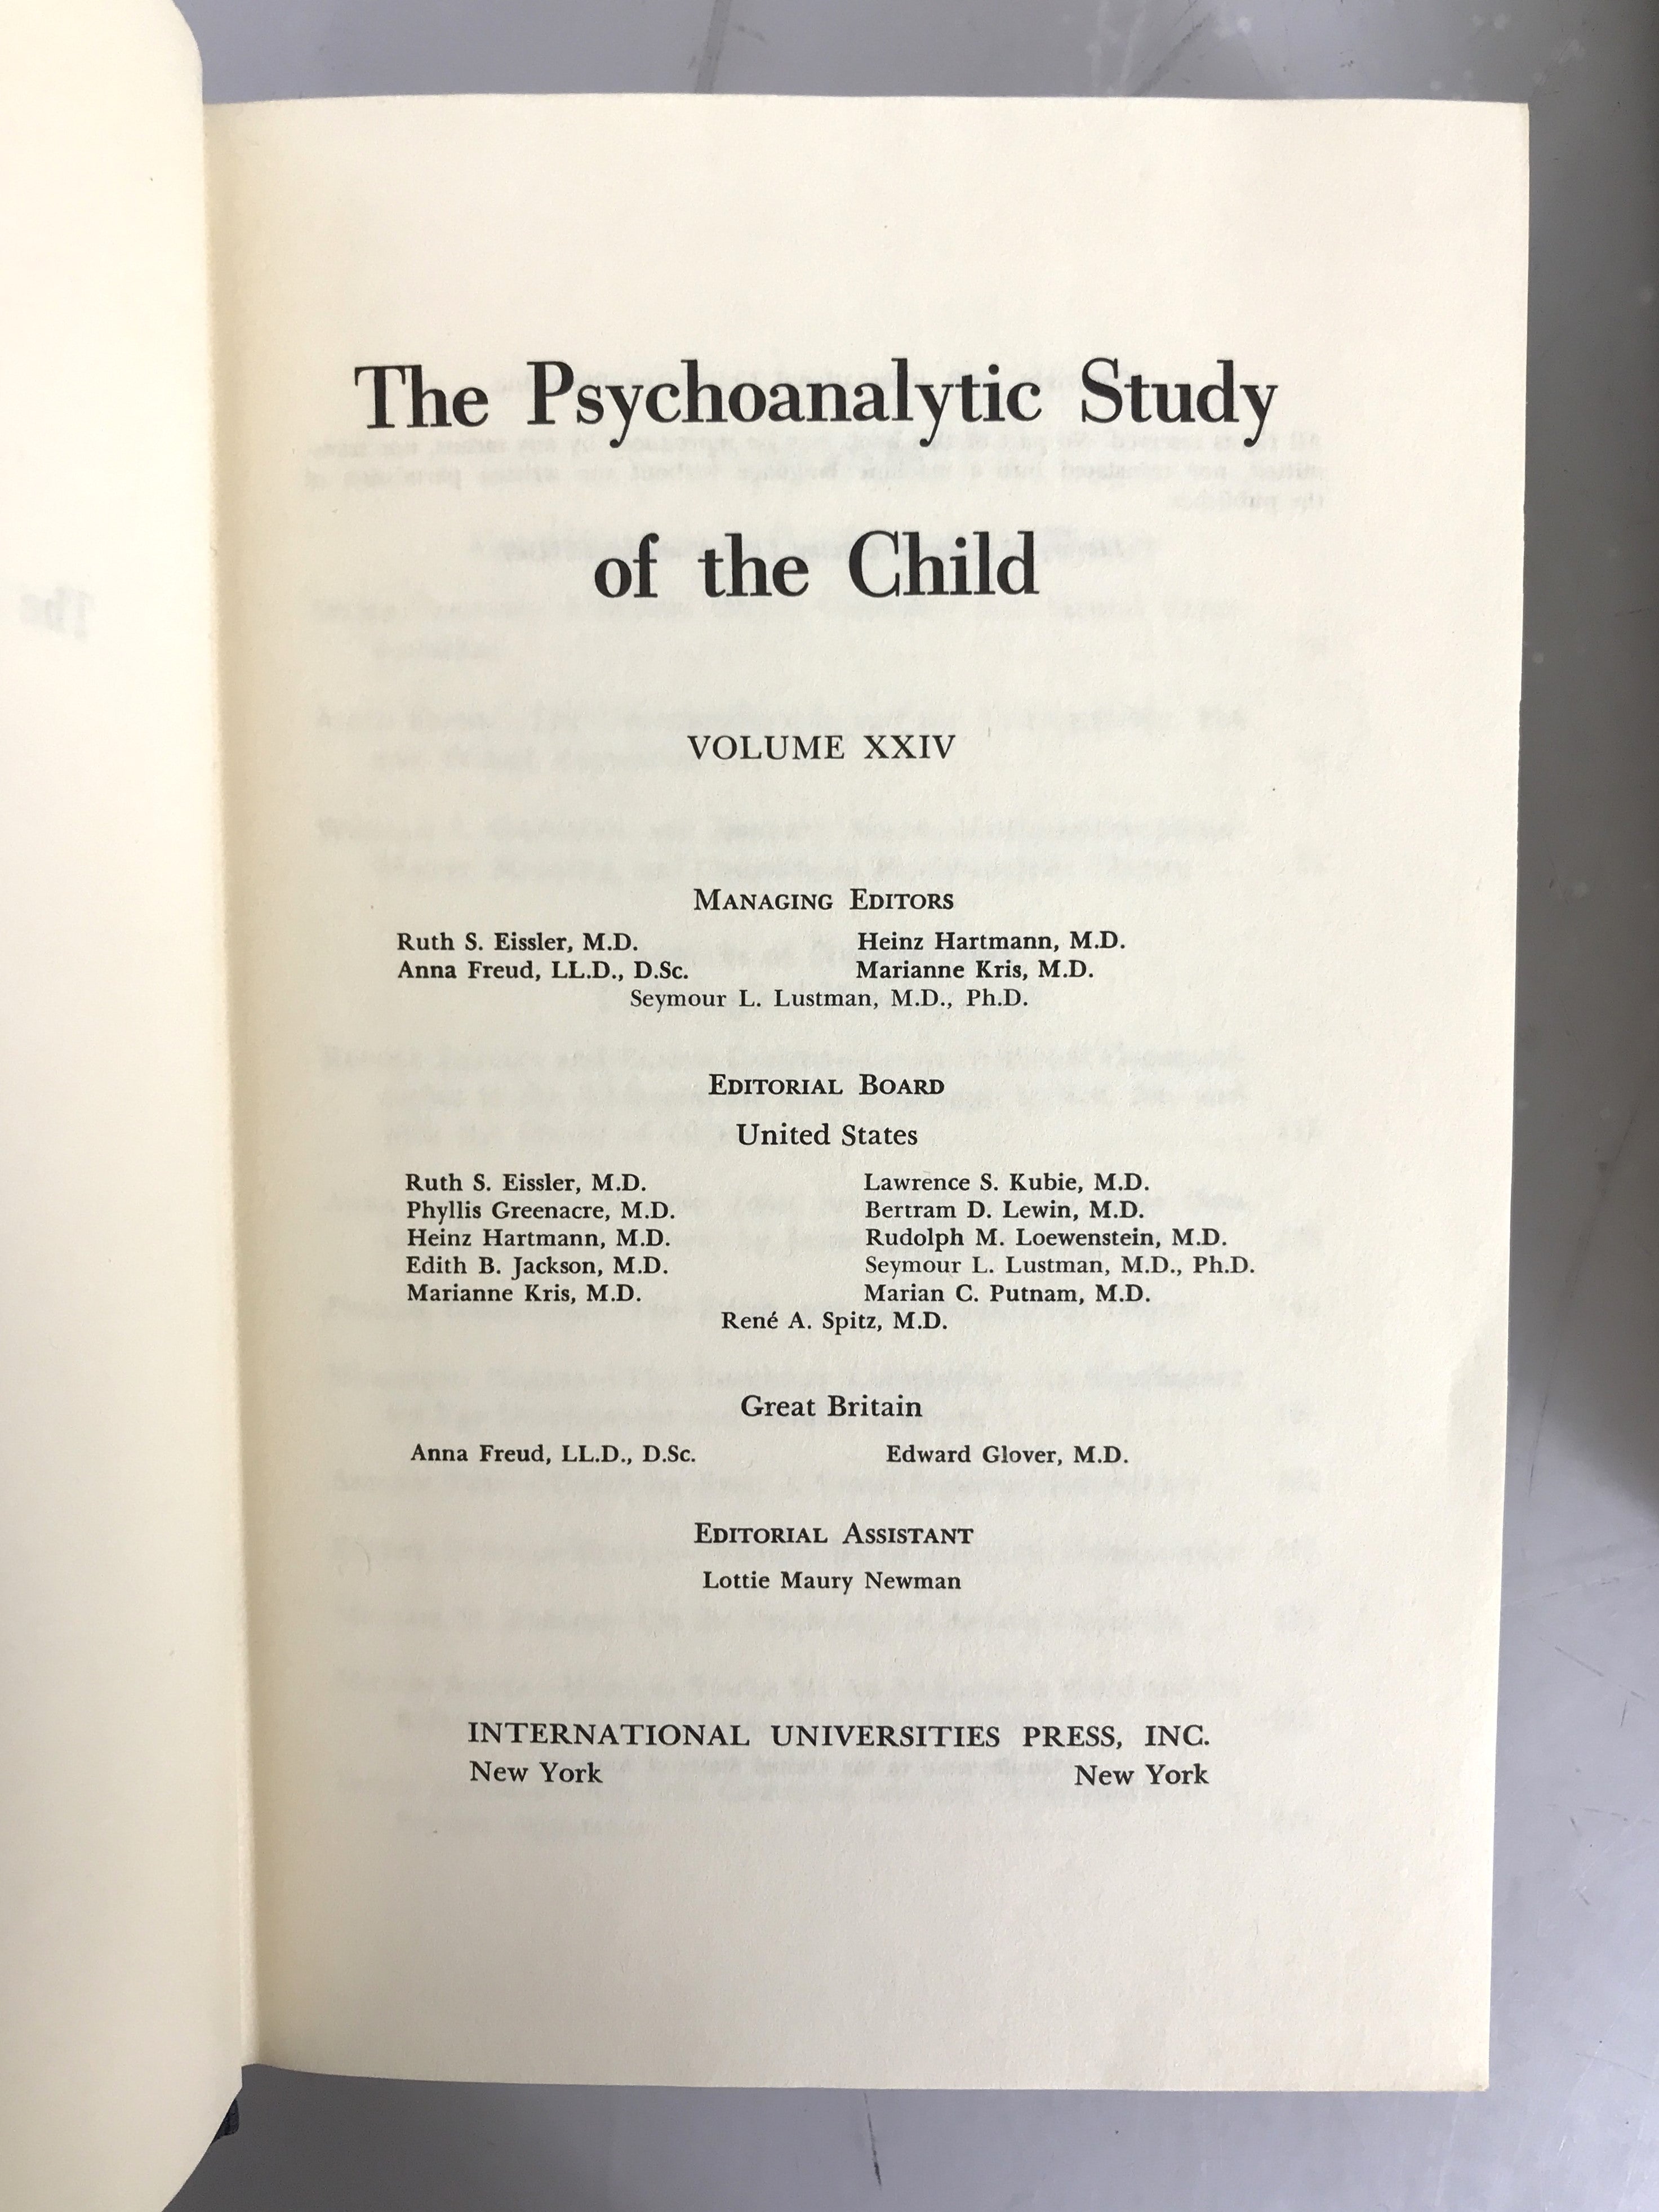 Lot of 5 The Psychoanalytic Study of the Child 1966-1969 and 1971 HC DJ